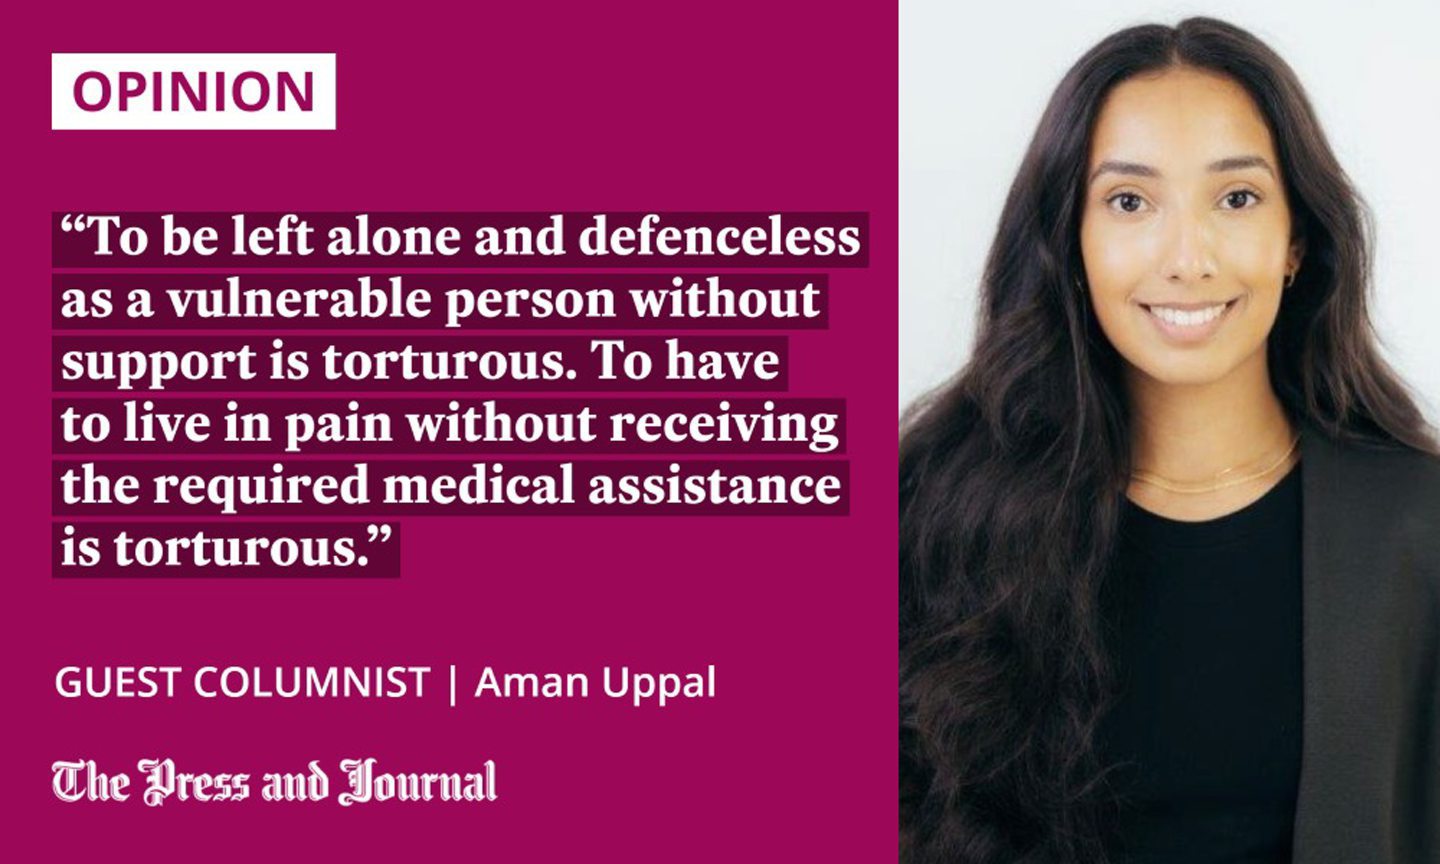 "To be left alone and defenceless as a vulnerable person without support is torturous. To have to live in pain without receiving the required medical assistance is torturous." Aman Uppal.